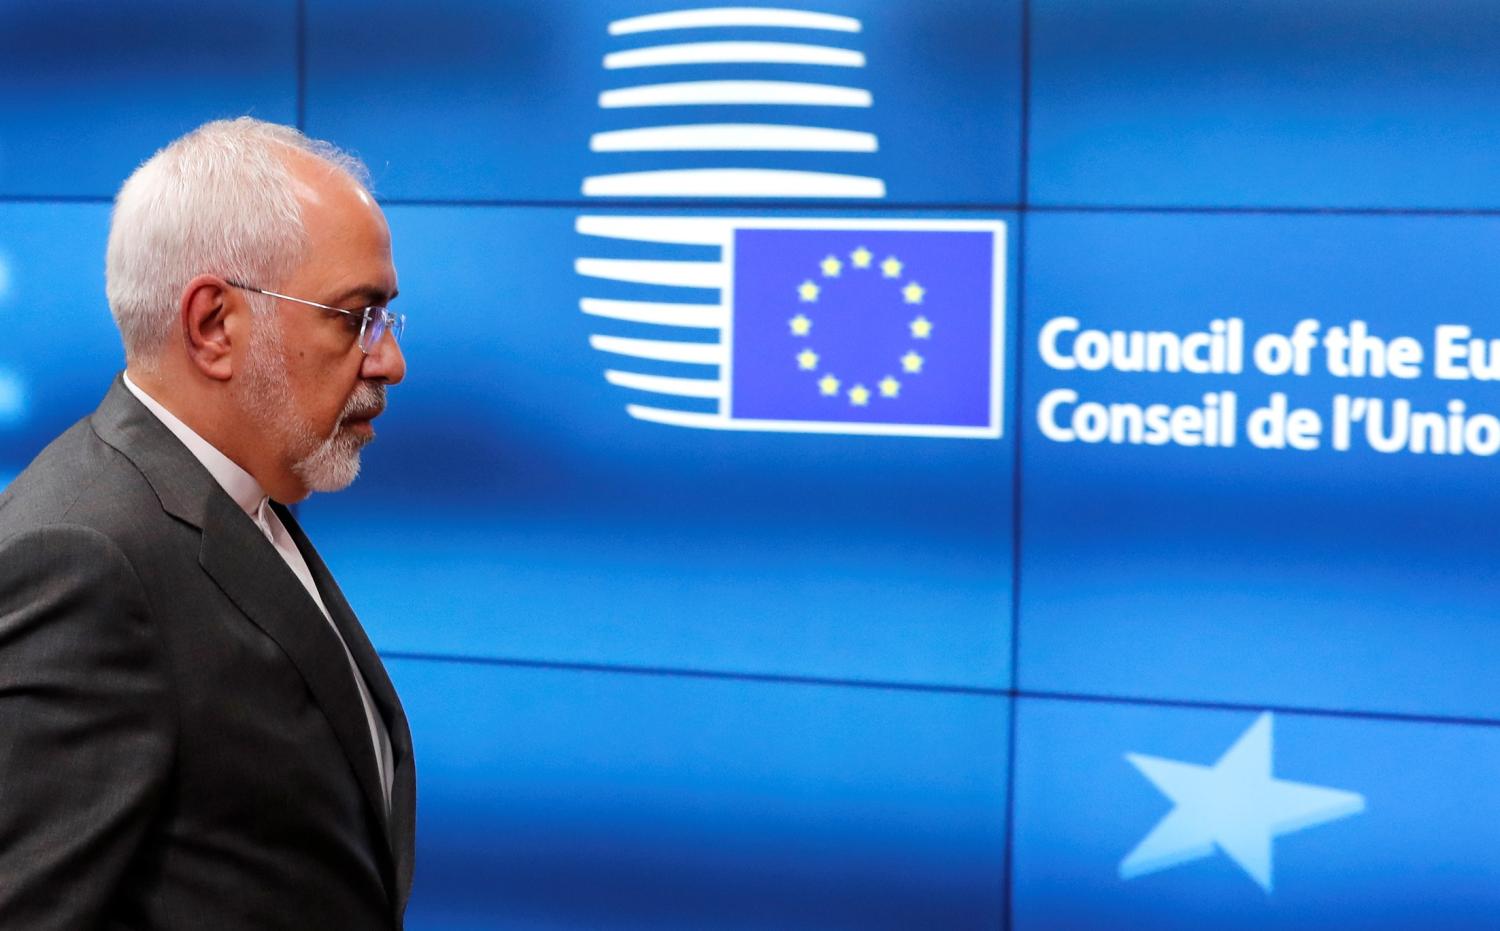 Iran's Foreign Minister Mohammad Javad Zarif arrives at the EU council in Brussels, Belgium May 15, 2018.  REUTERS/Yves Herman - RC1873ED5BB0